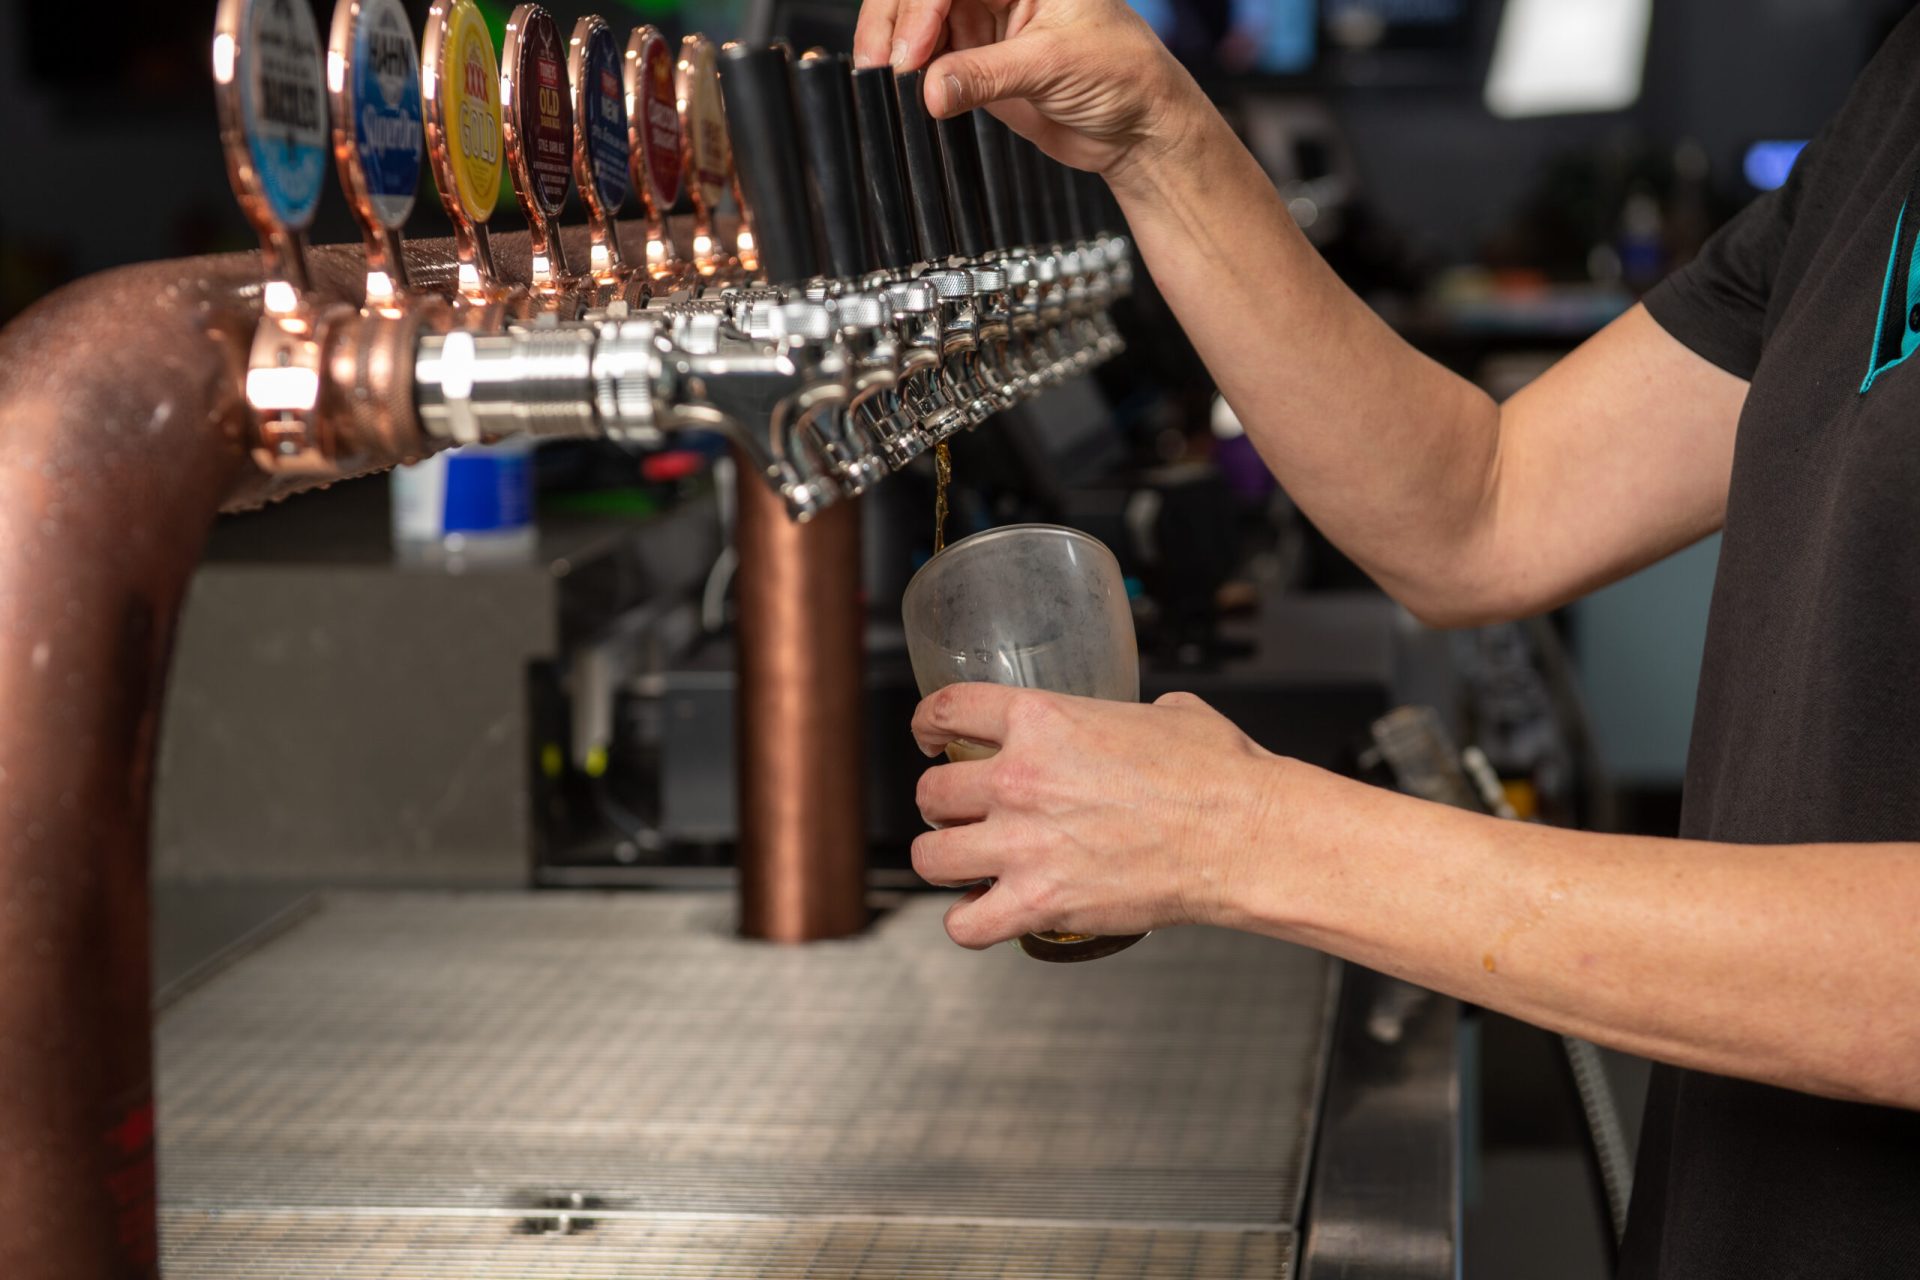 Beer on tap, by the bottle and other drinks served. Contact us today for your local club entertainment and service.